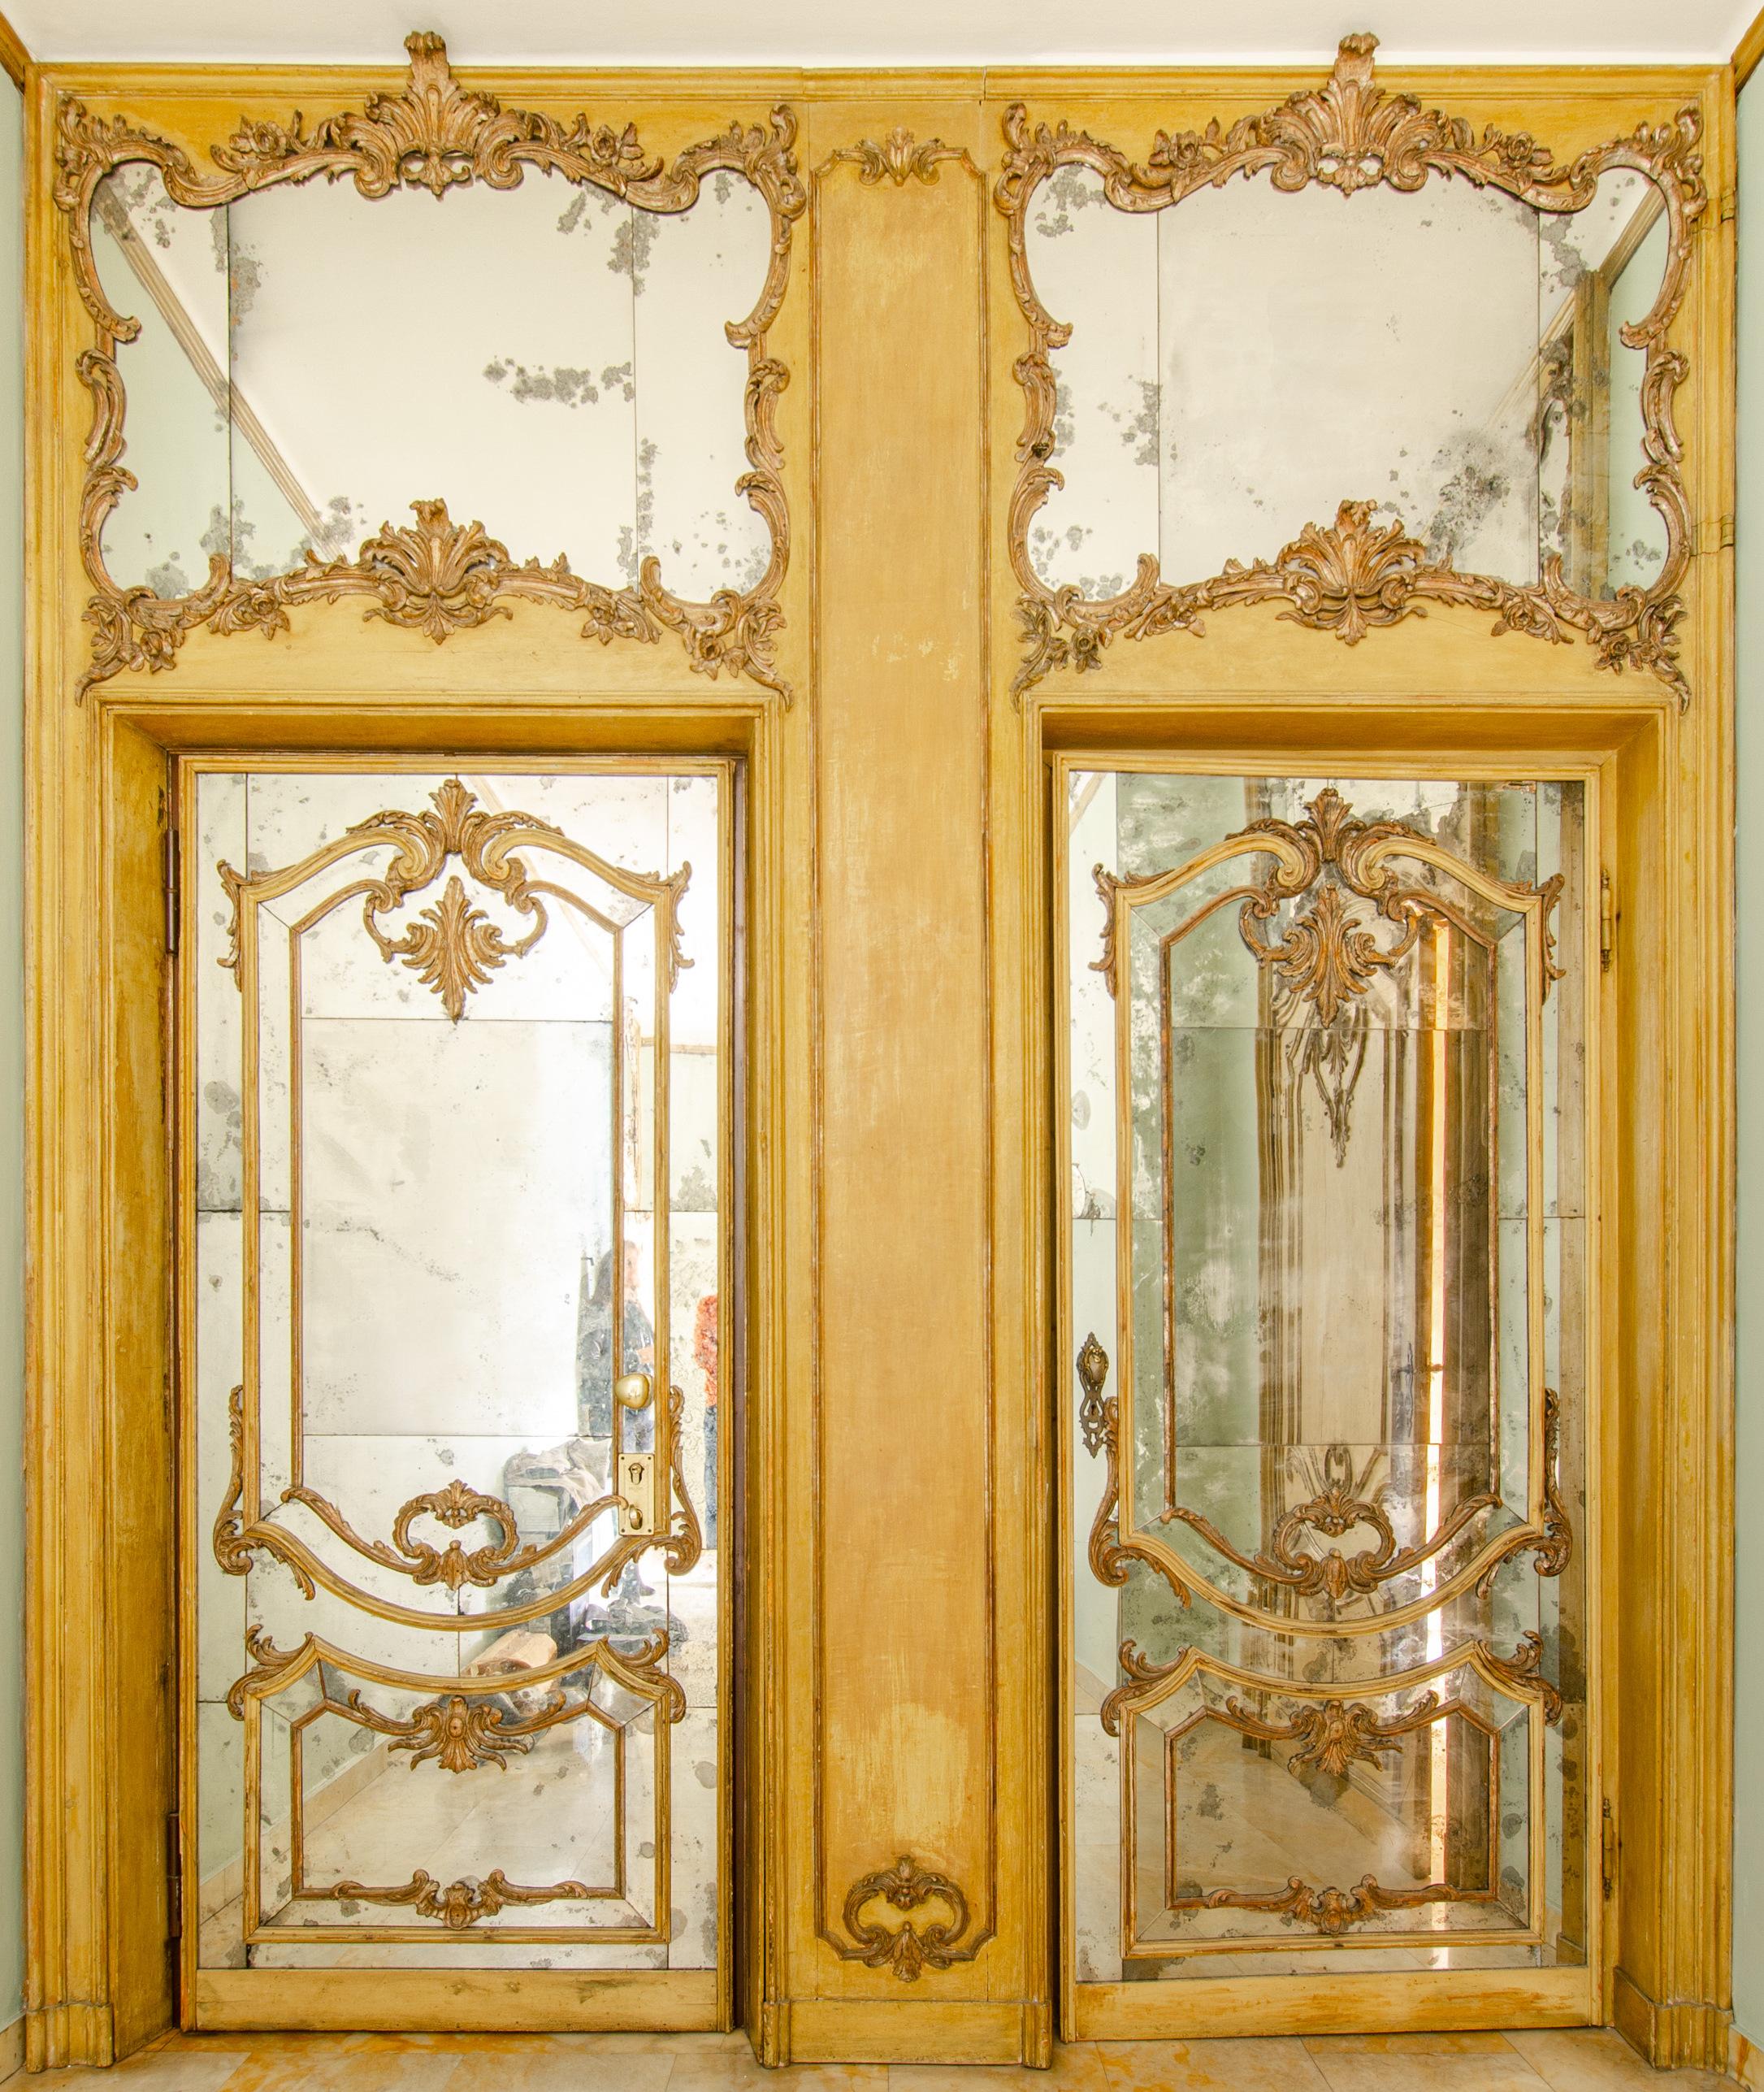 Hand-Painted 2 Antiques Baroque Mirrors Doors Lacquered Gilded Mirror Updoor, 1700, Italy